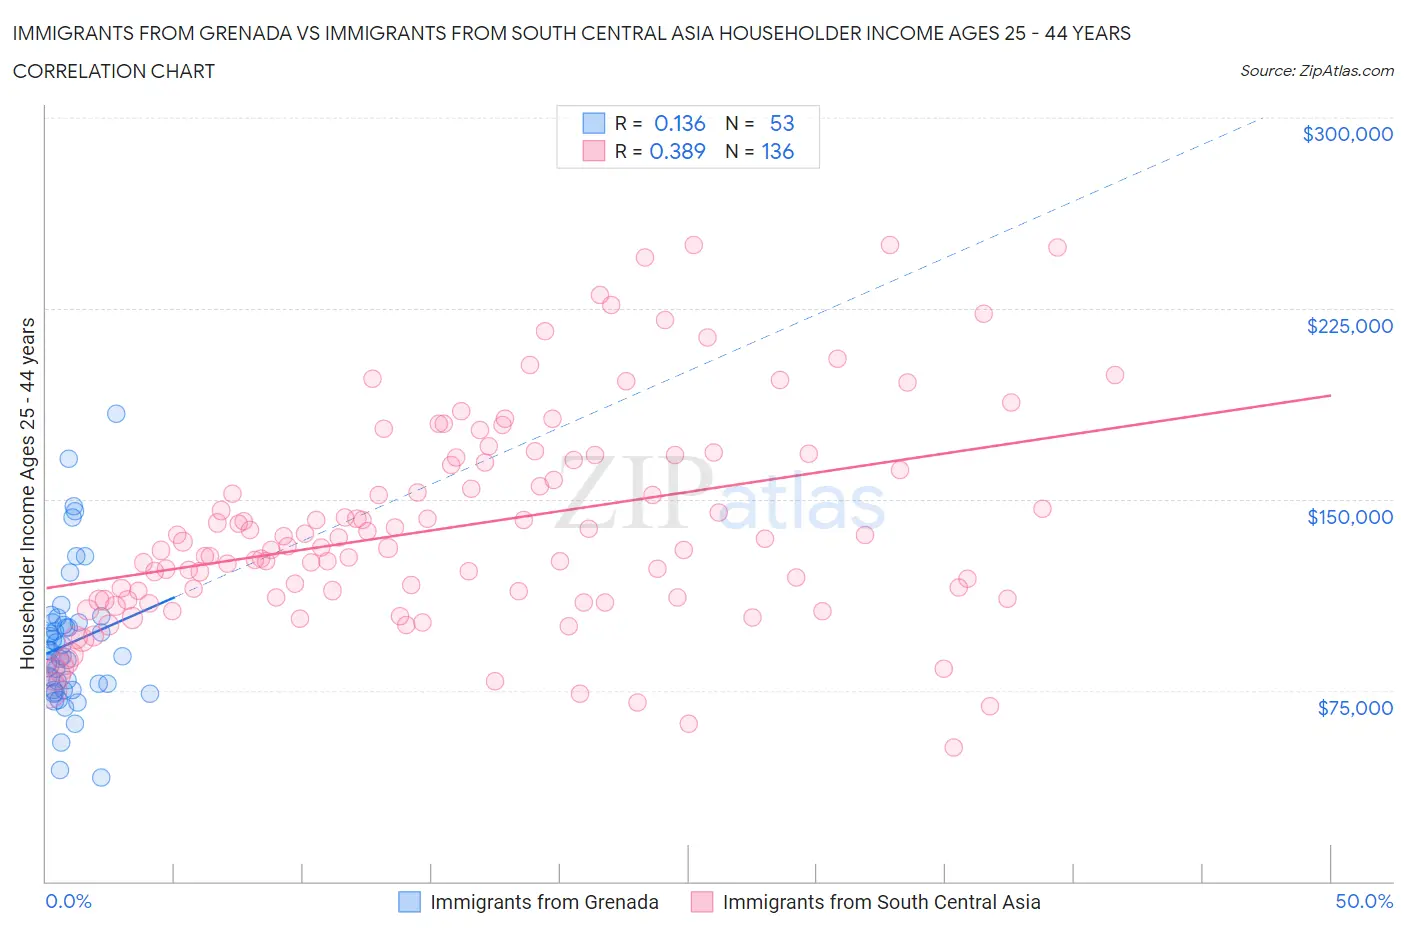 Immigrants from Grenada vs Immigrants from South Central Asia Householder Income Ages 25 - 44 years